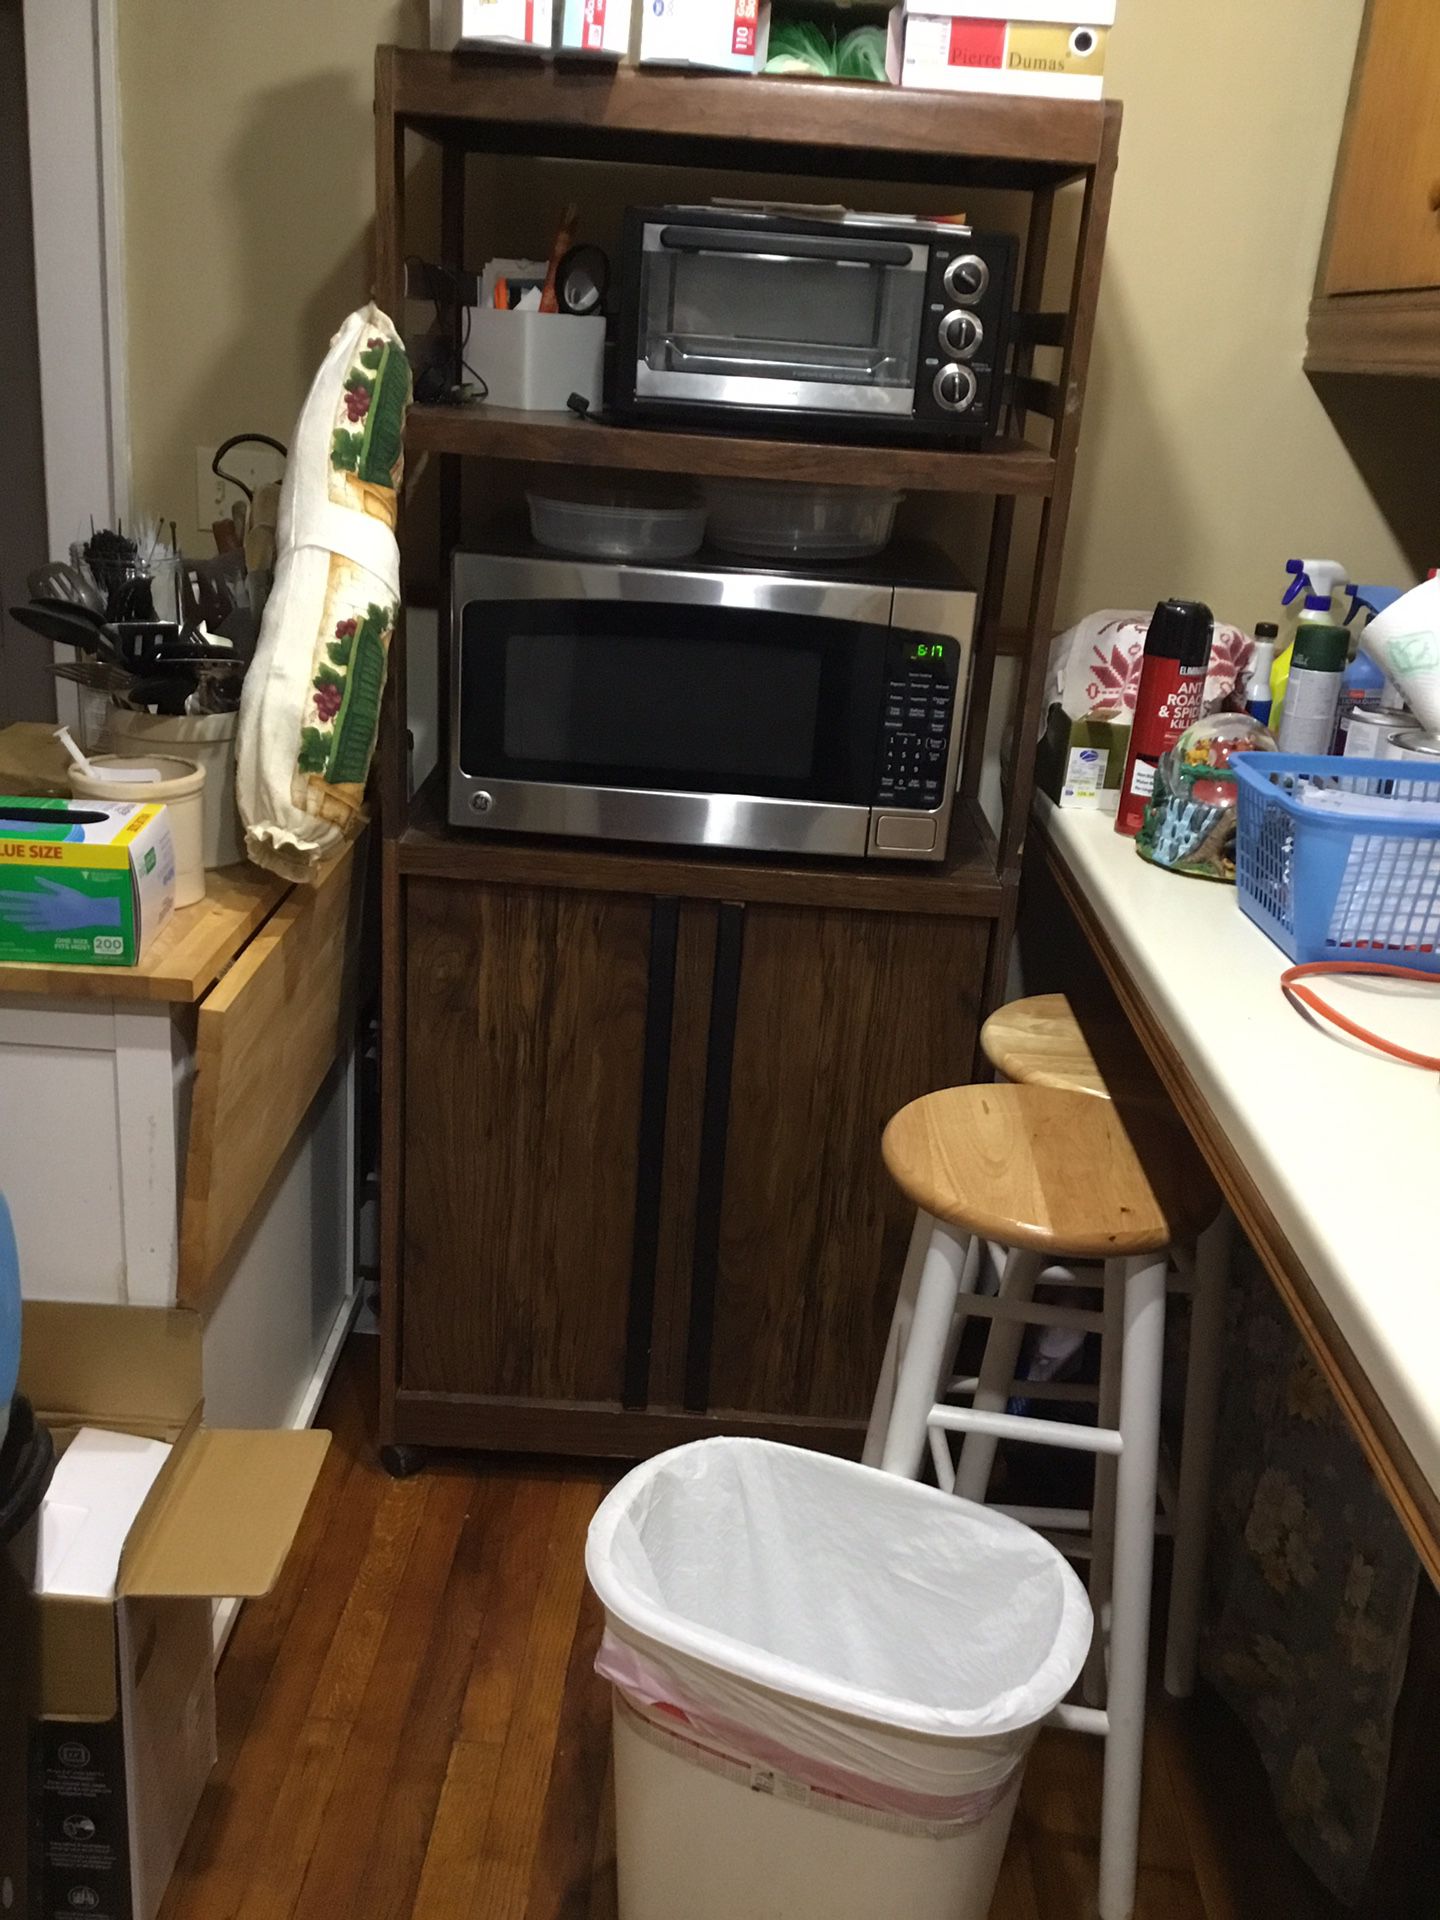 Microwave oven stand and storage $20